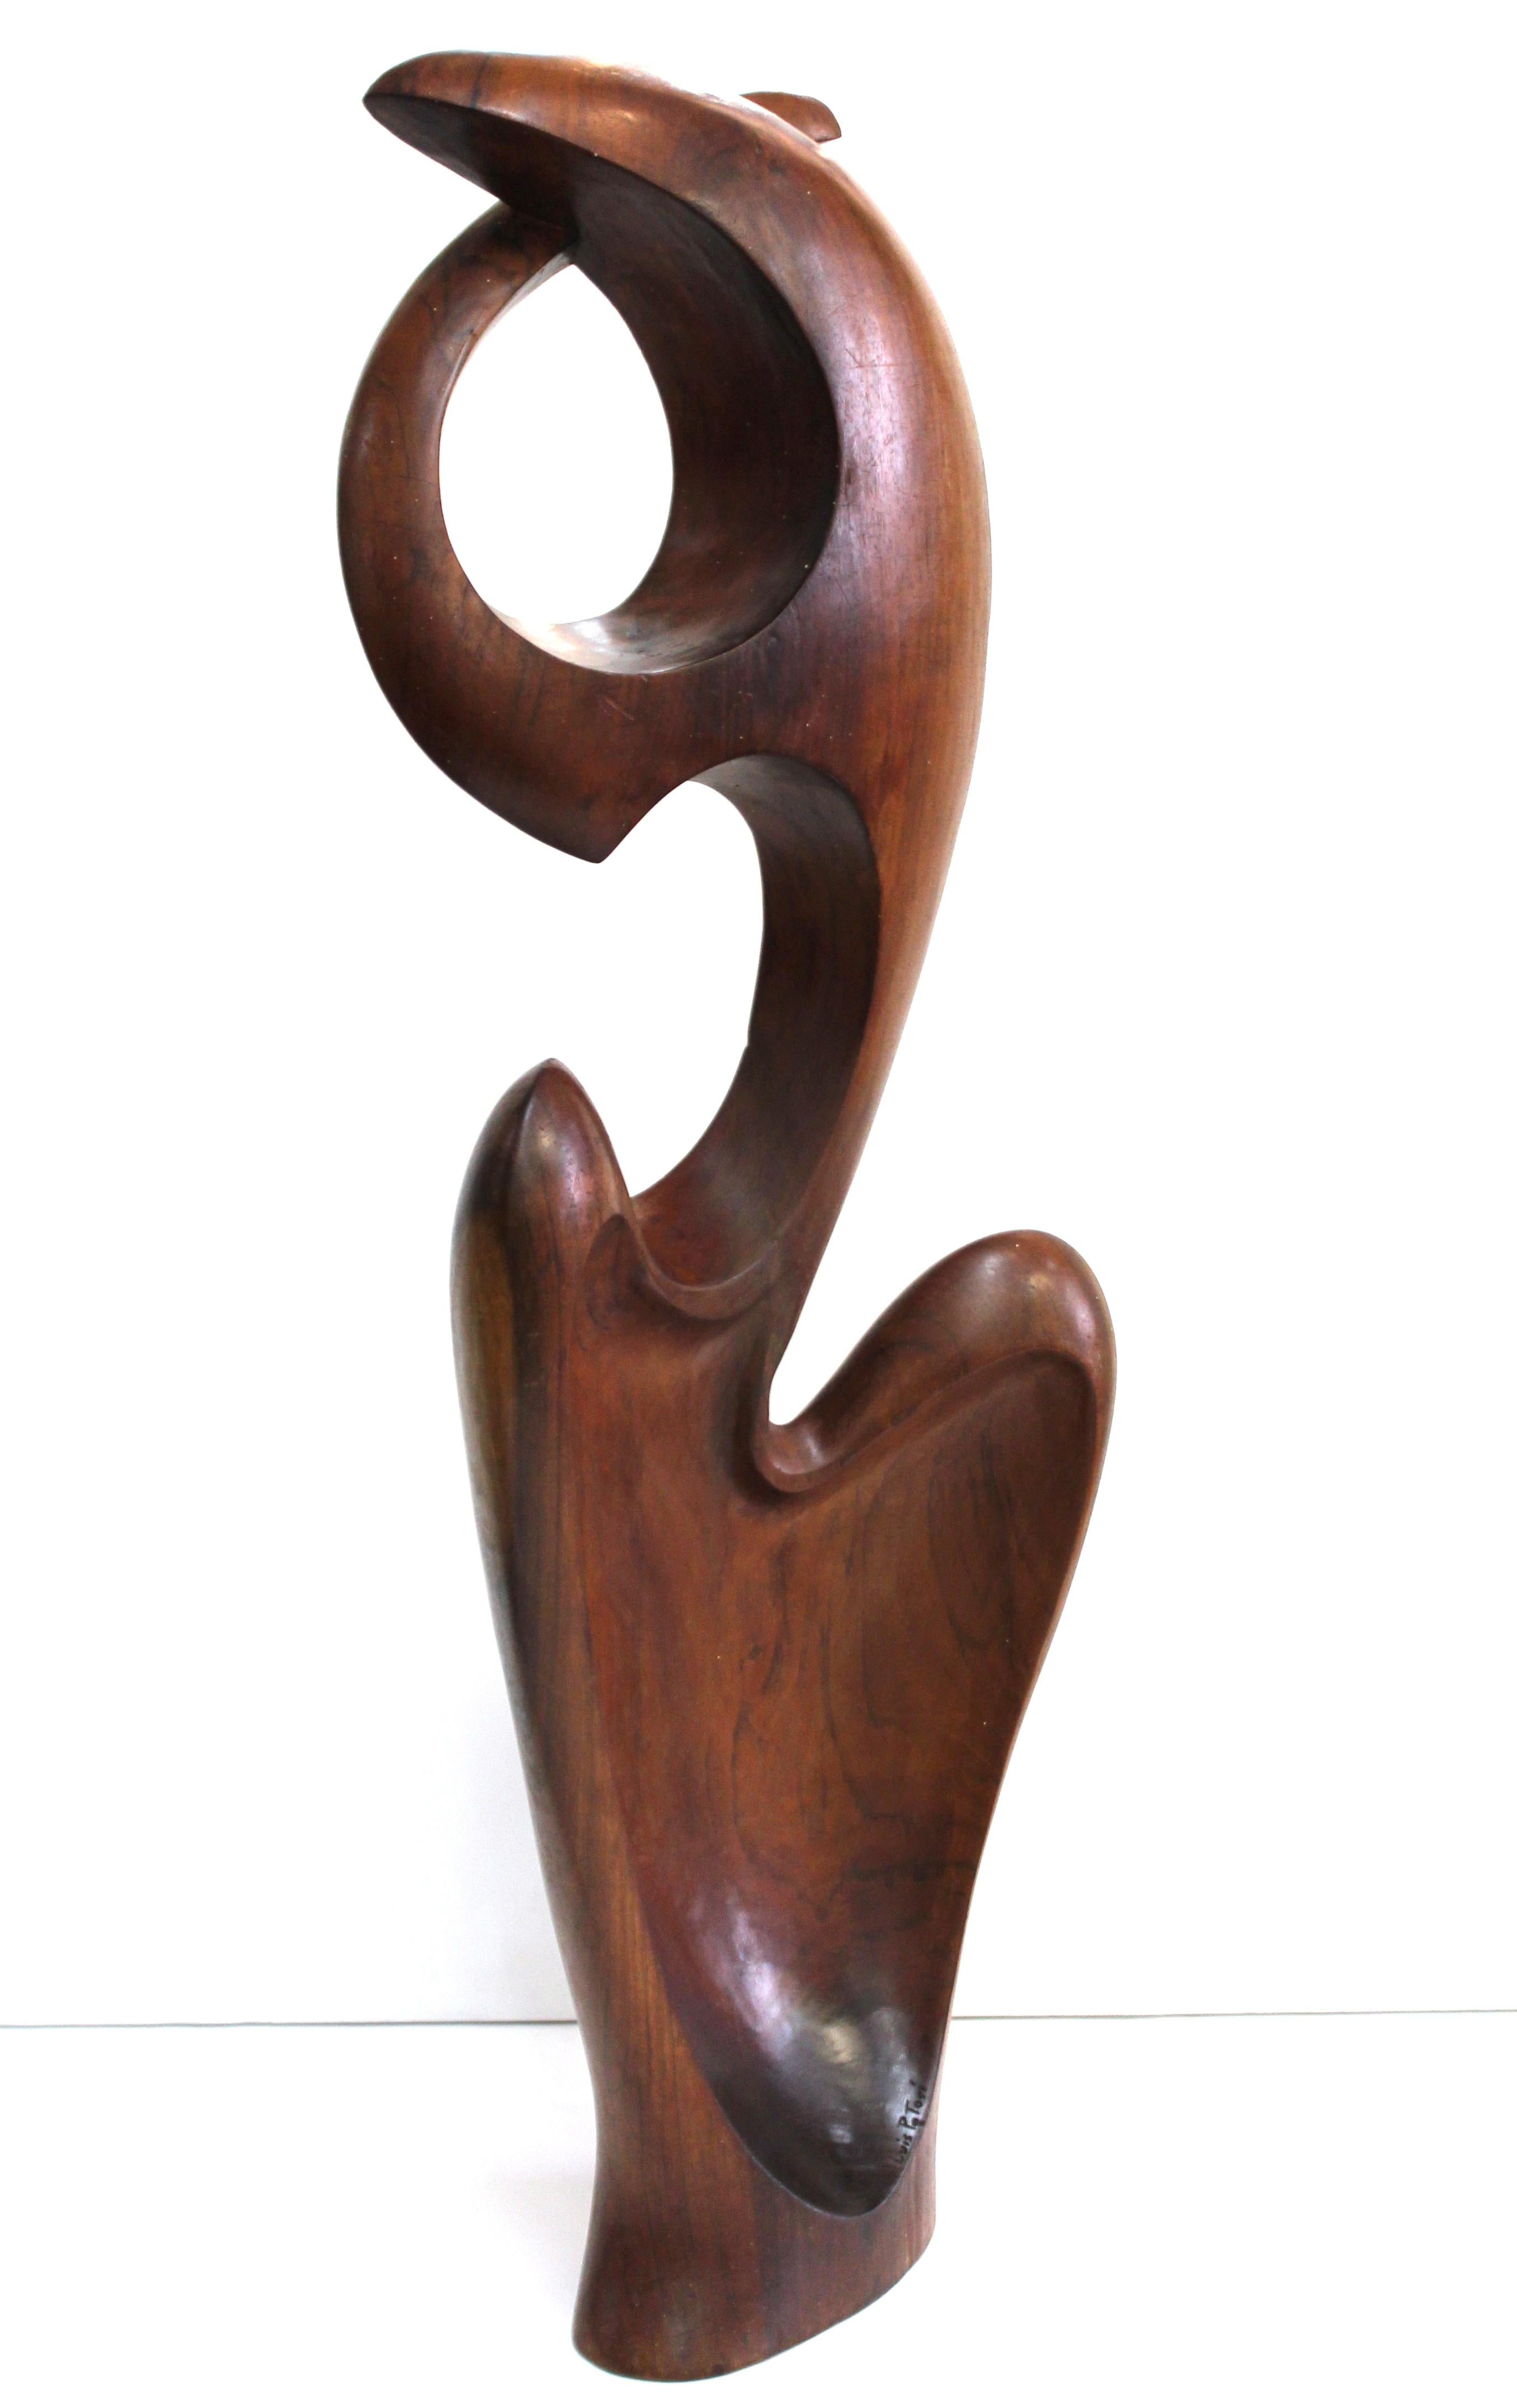 Ecuadorian Modernist abstract sculpture in carved wood, created by Luis Potosi during the mid- late 20th century. The piece depicts an abstract biomorphic shape and is signed 'Luis Potosi' on the inner lip of the carved base. In great vintage